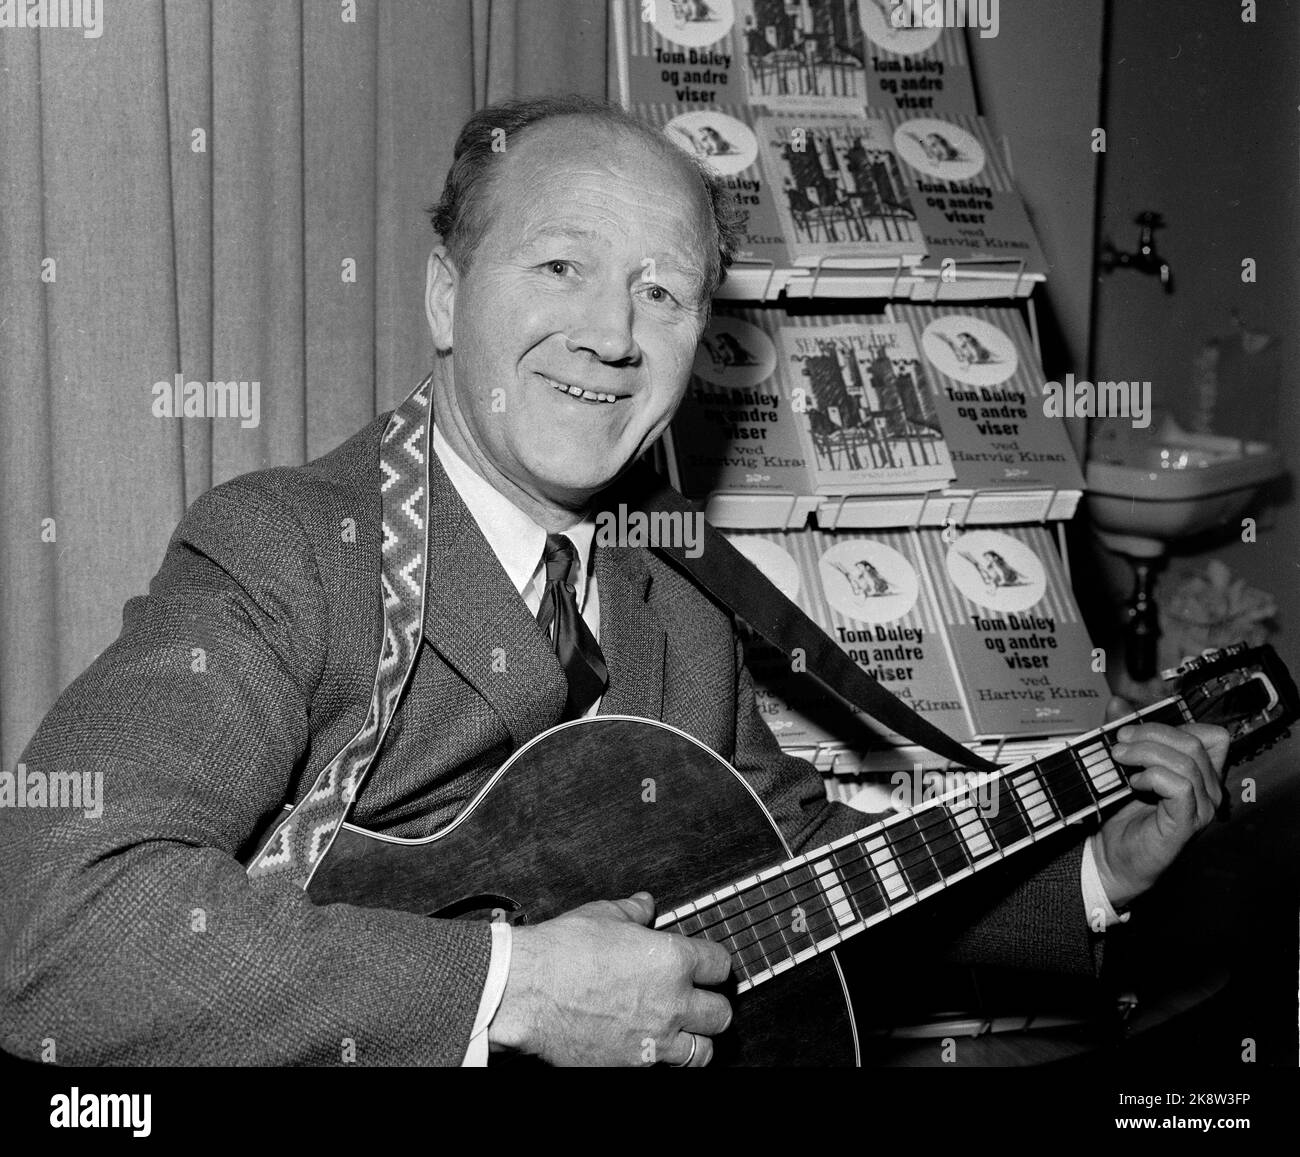 Oslo 19621027 Program Secretary in NRK Hartvig Kiran, with guitar and two of their vice -books. Photo: NTB / NTB Stock Photo